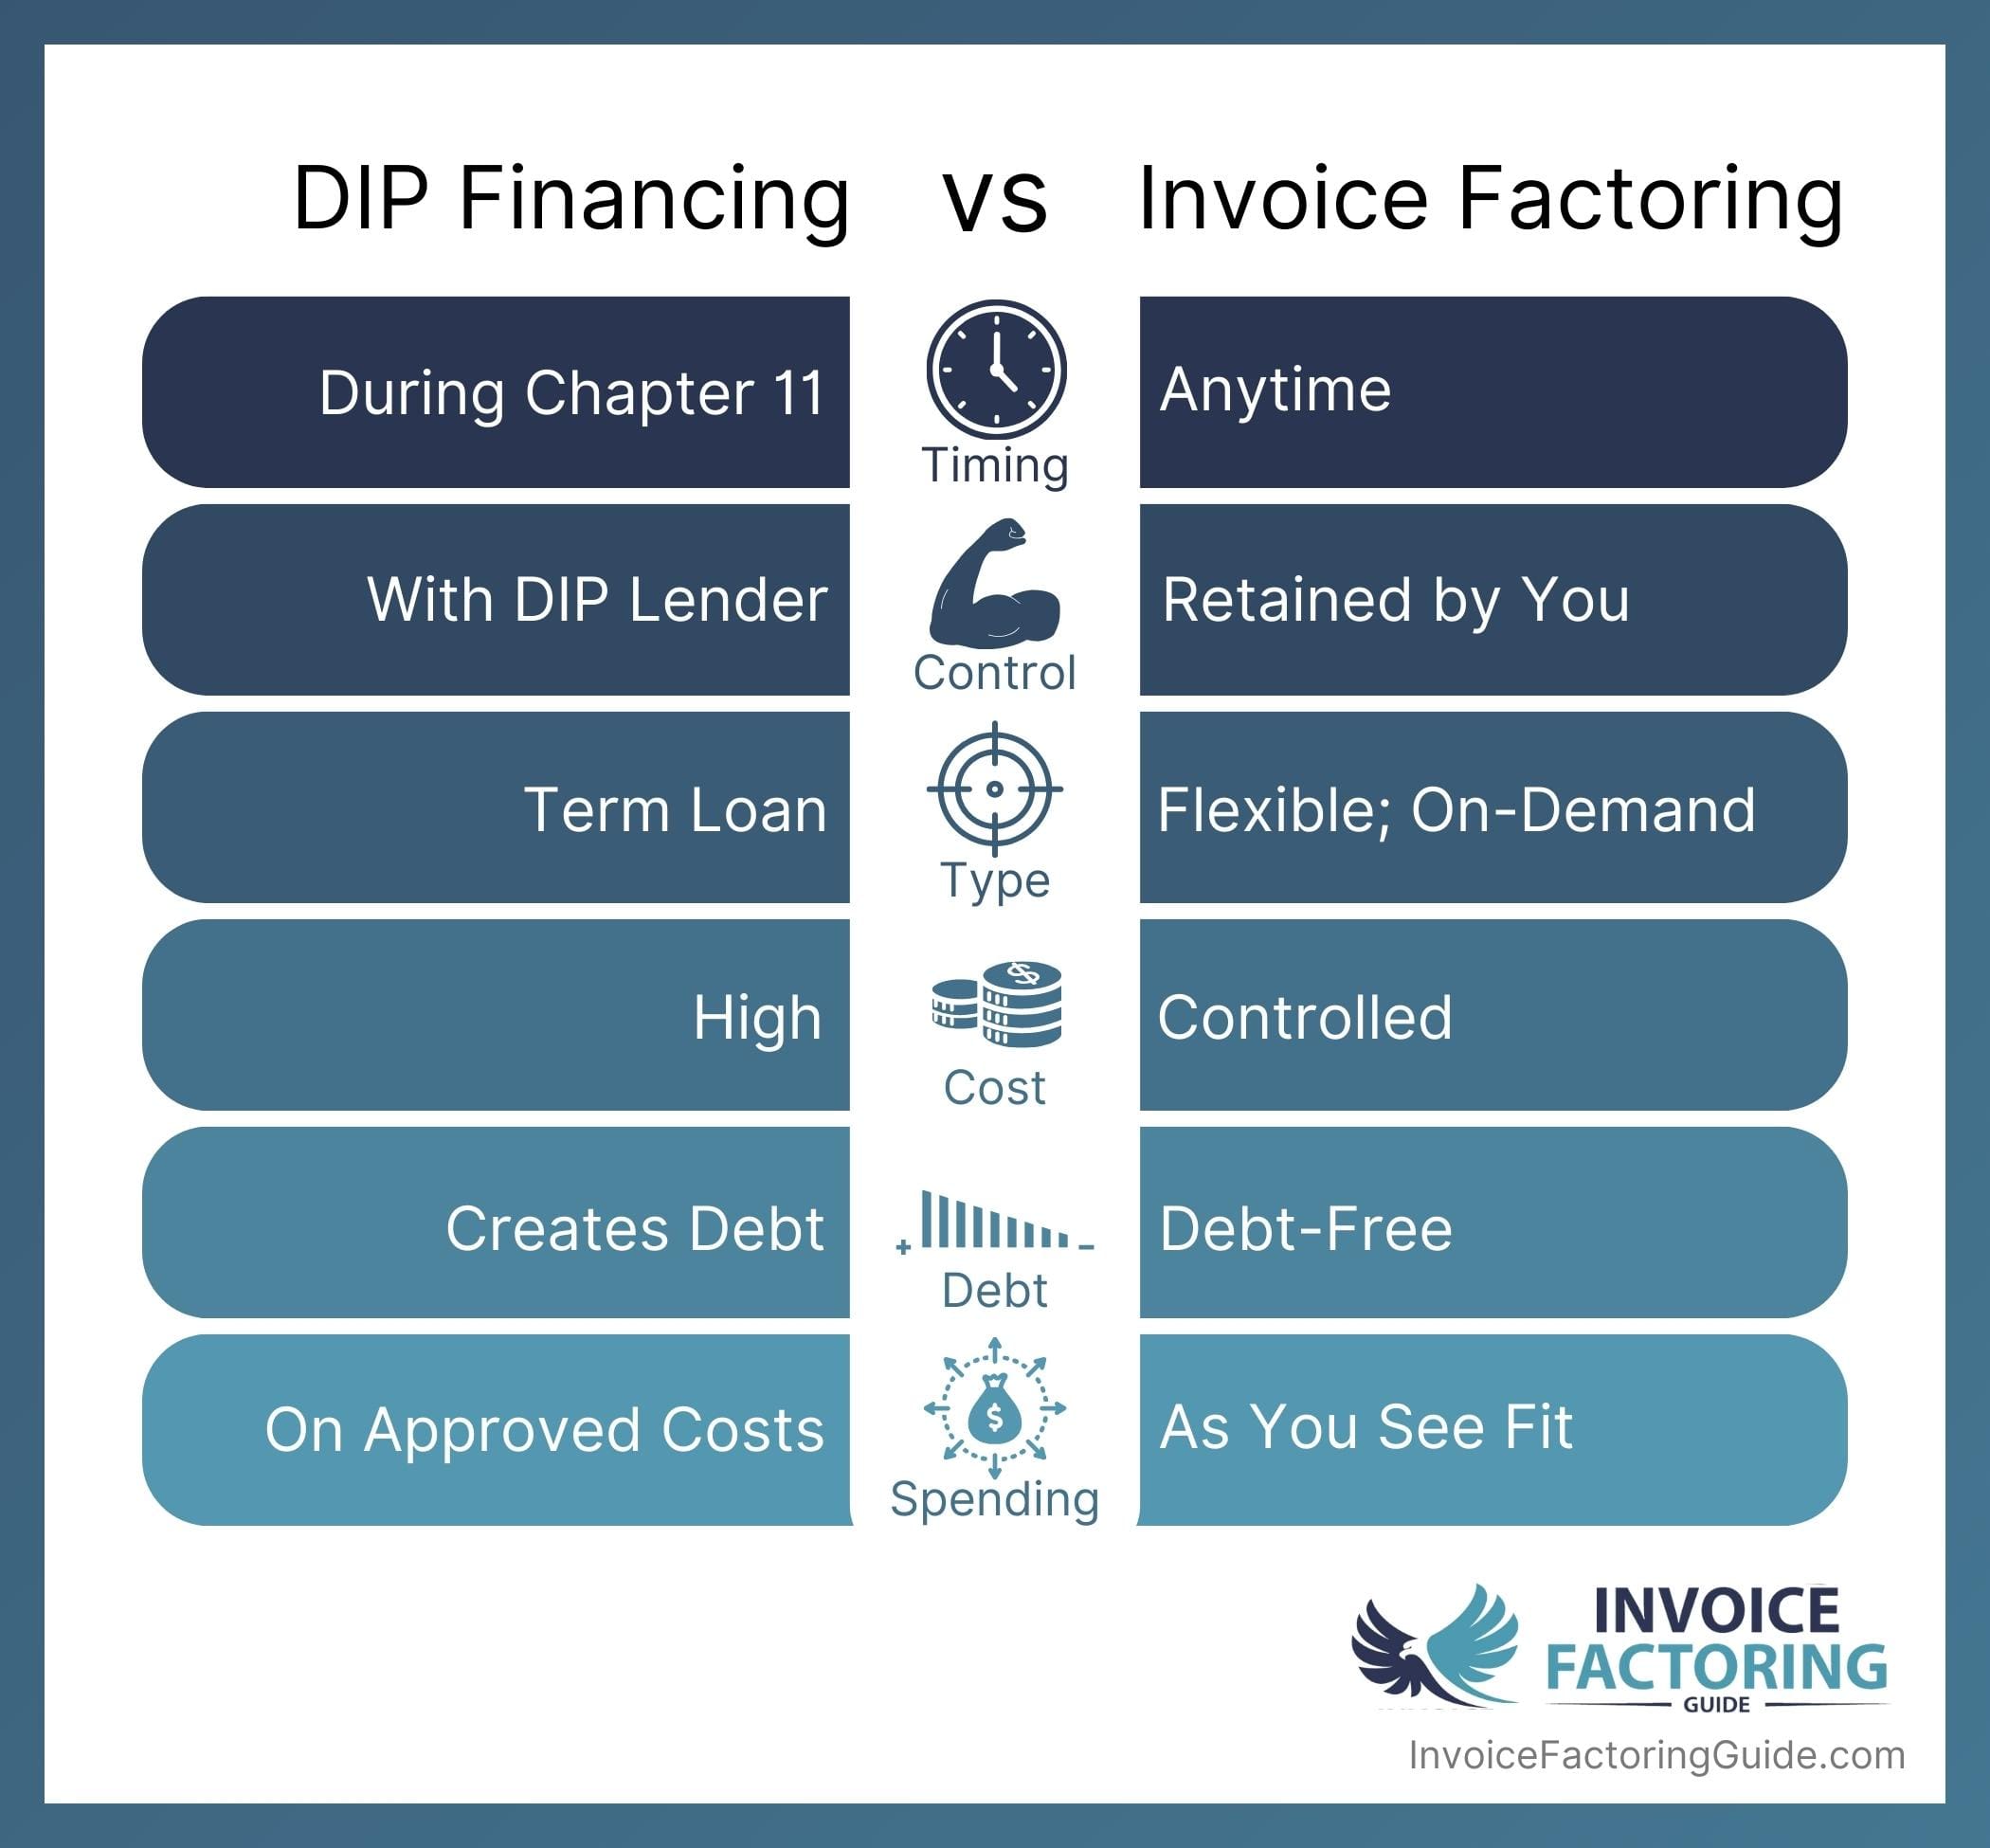 DIP Financing vs. Invoice Factoring: A Comparative Analysis